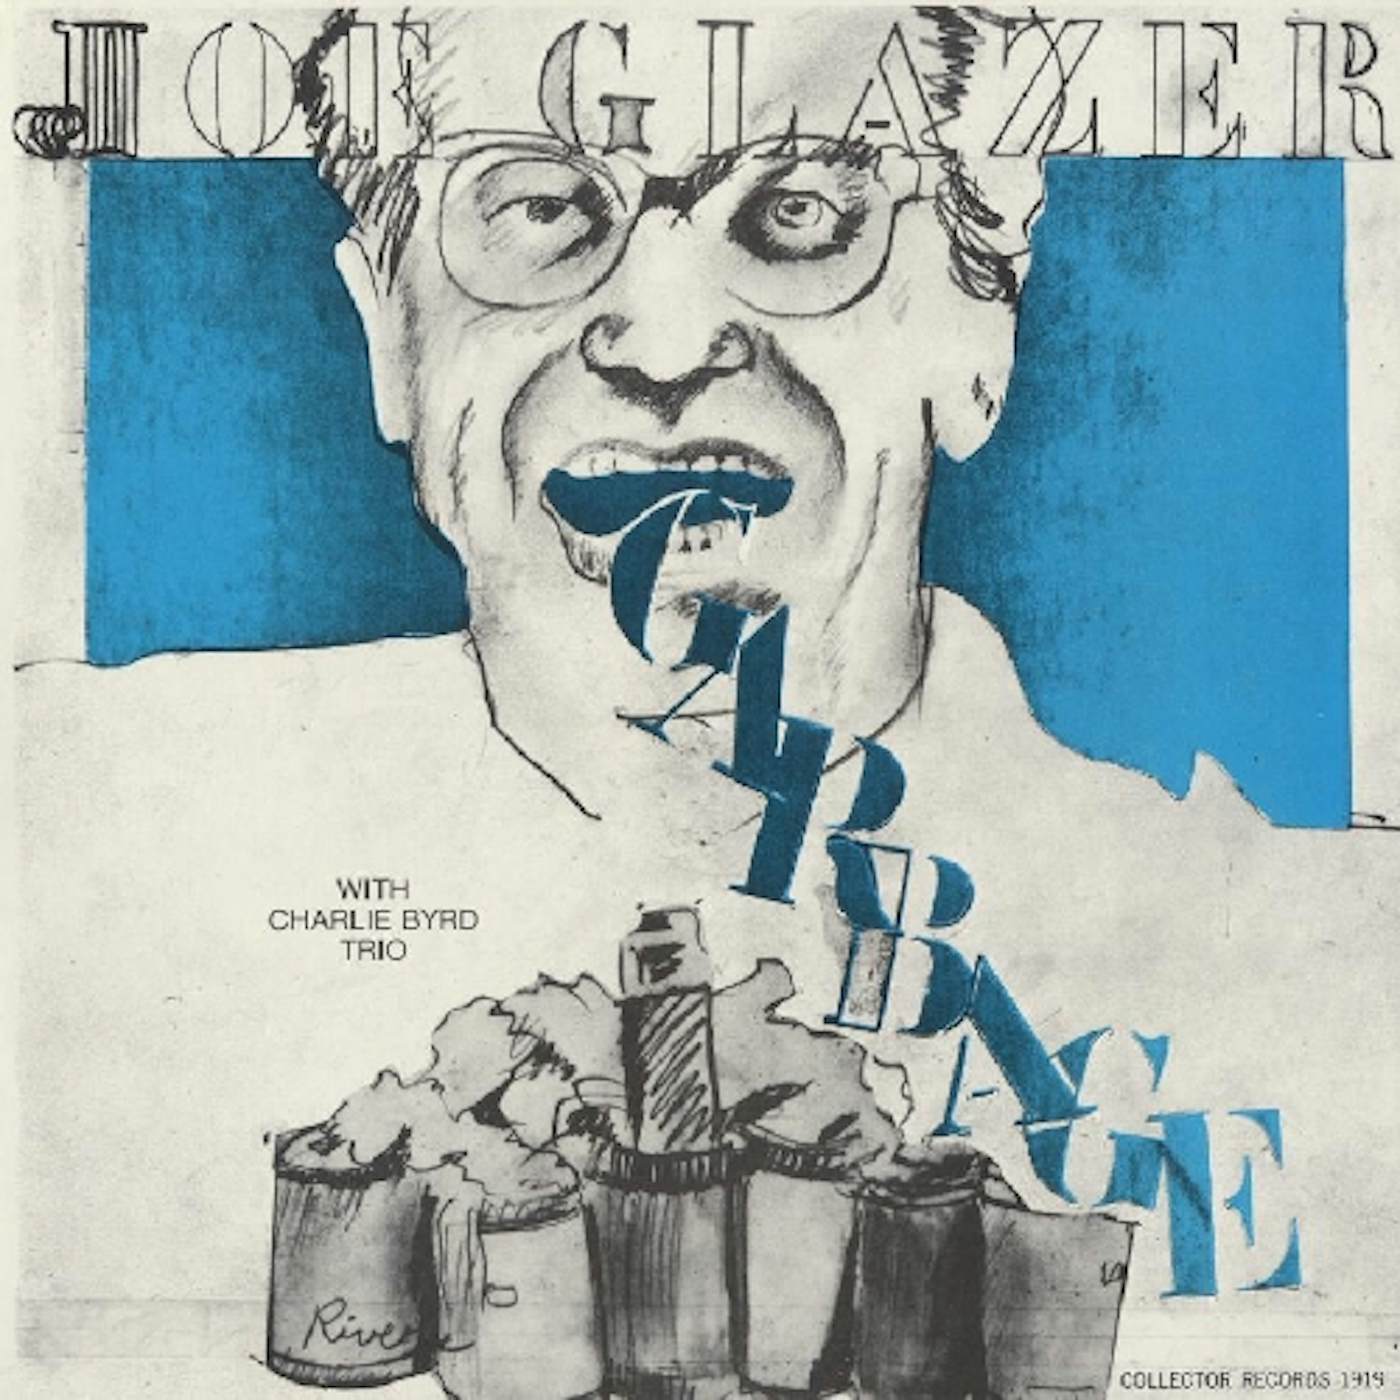 Joe Glazer GARBAGE AND OTHER SONGS OF OUR TIME CD